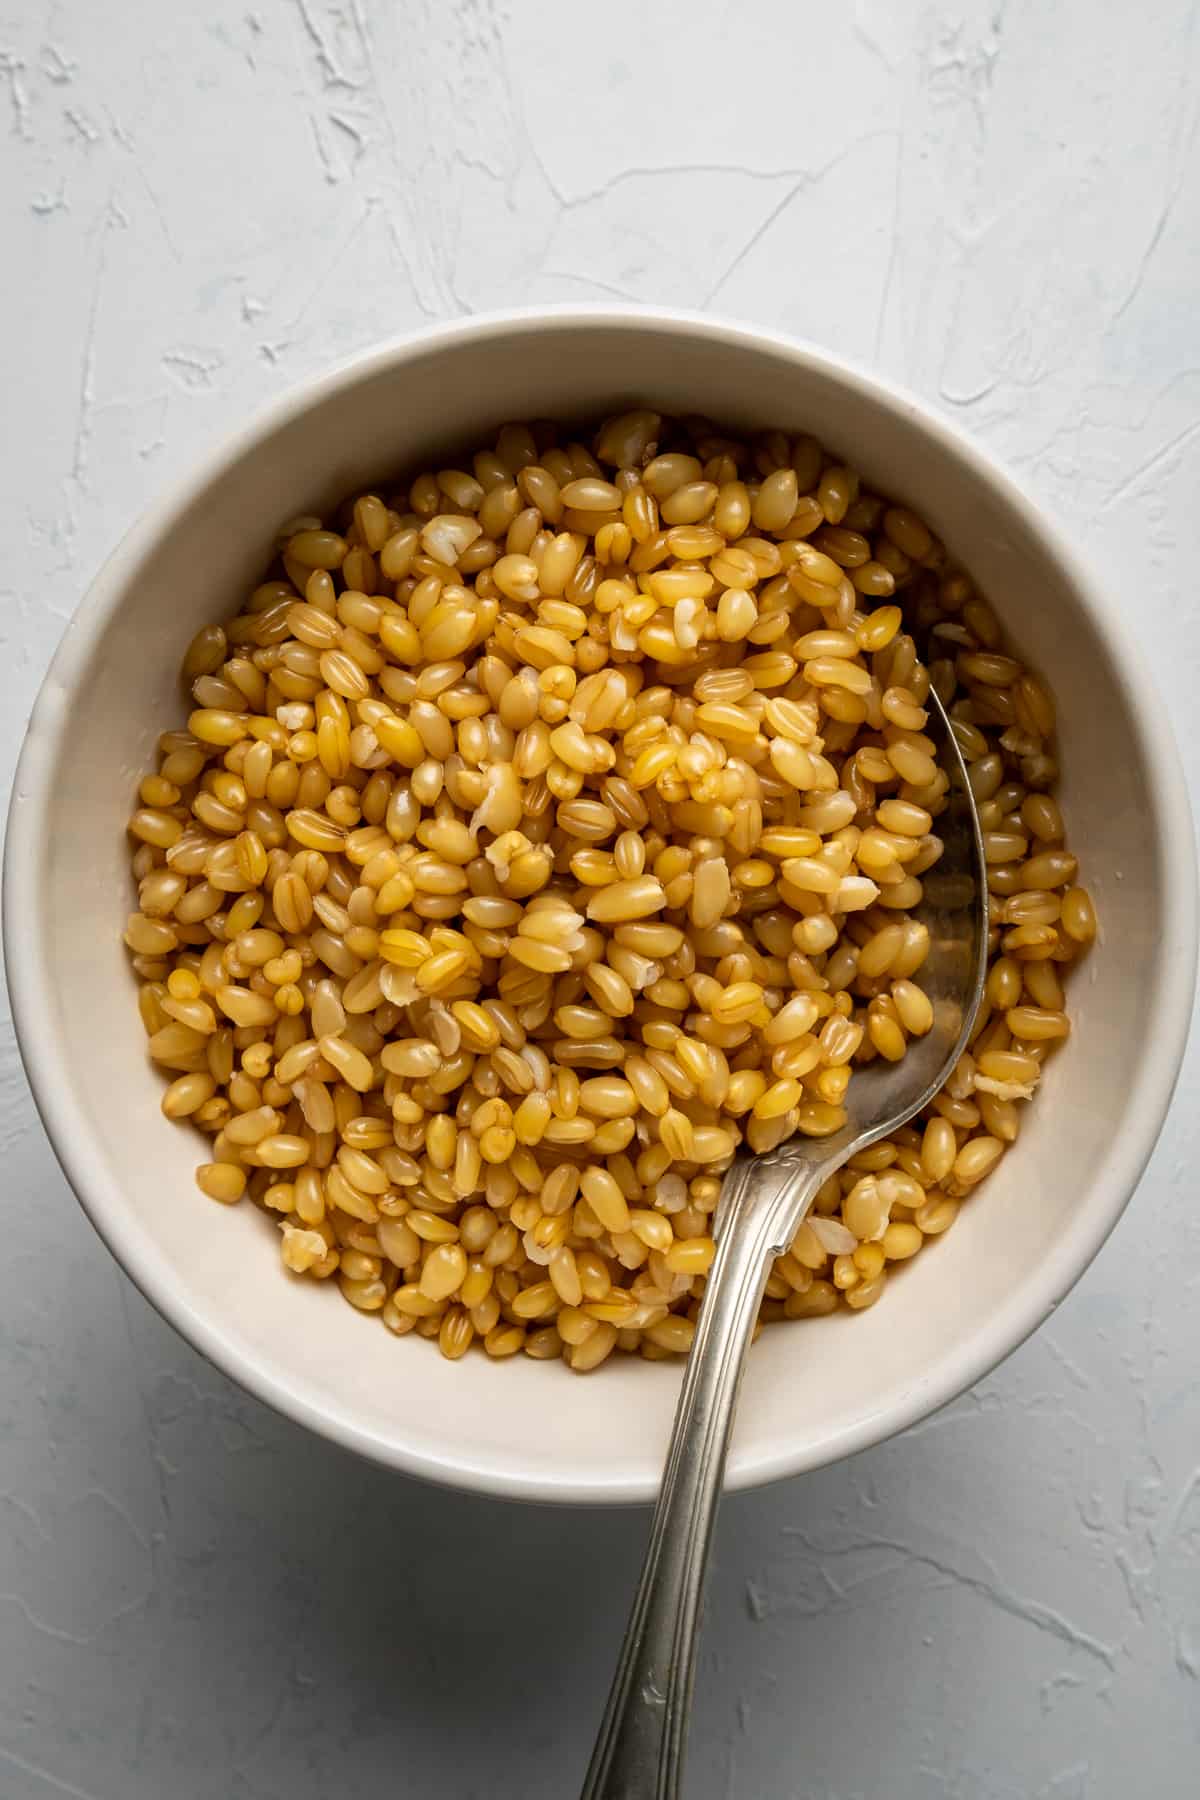 Cooked wheat berries in a white bowl and a spoon in it.